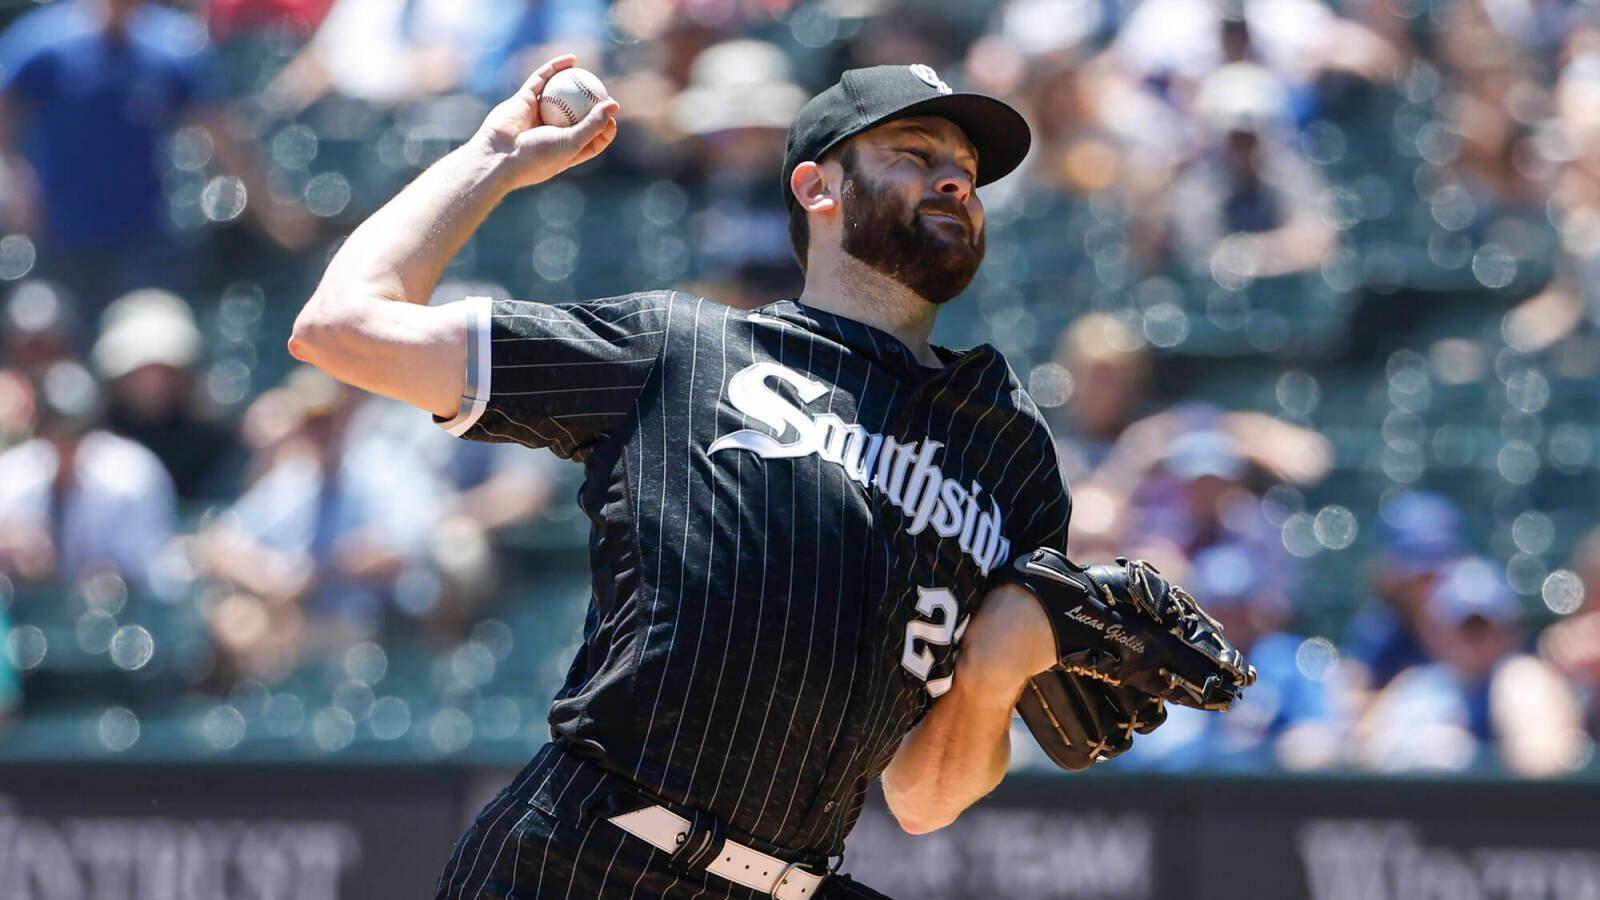 Royals vs. White Sox (August 2): Will Giolito’s miserable home run end tonight?